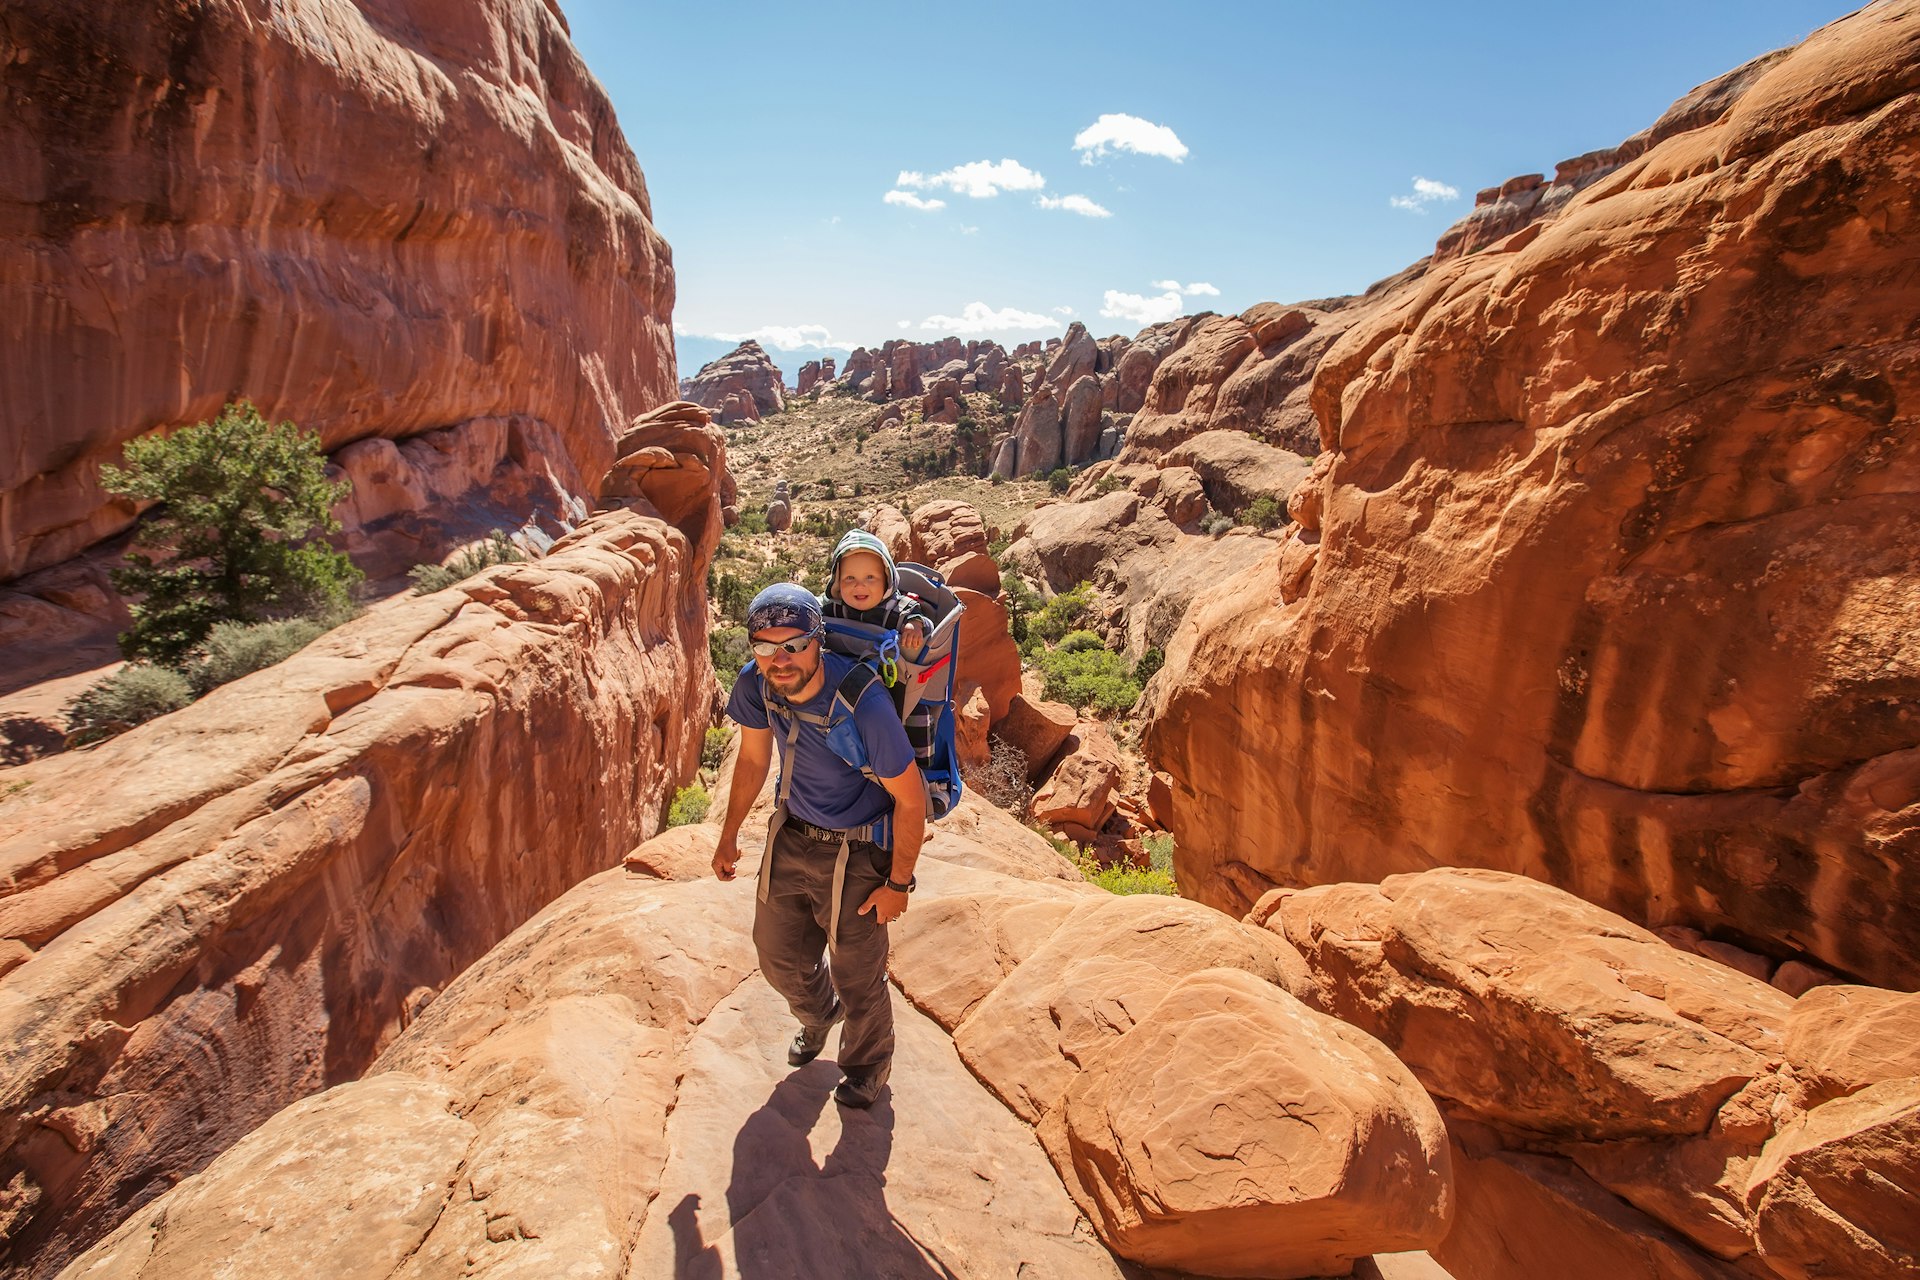 Man carrying a baby in a backpack hiking and enjoying the thrills of Arches National Park